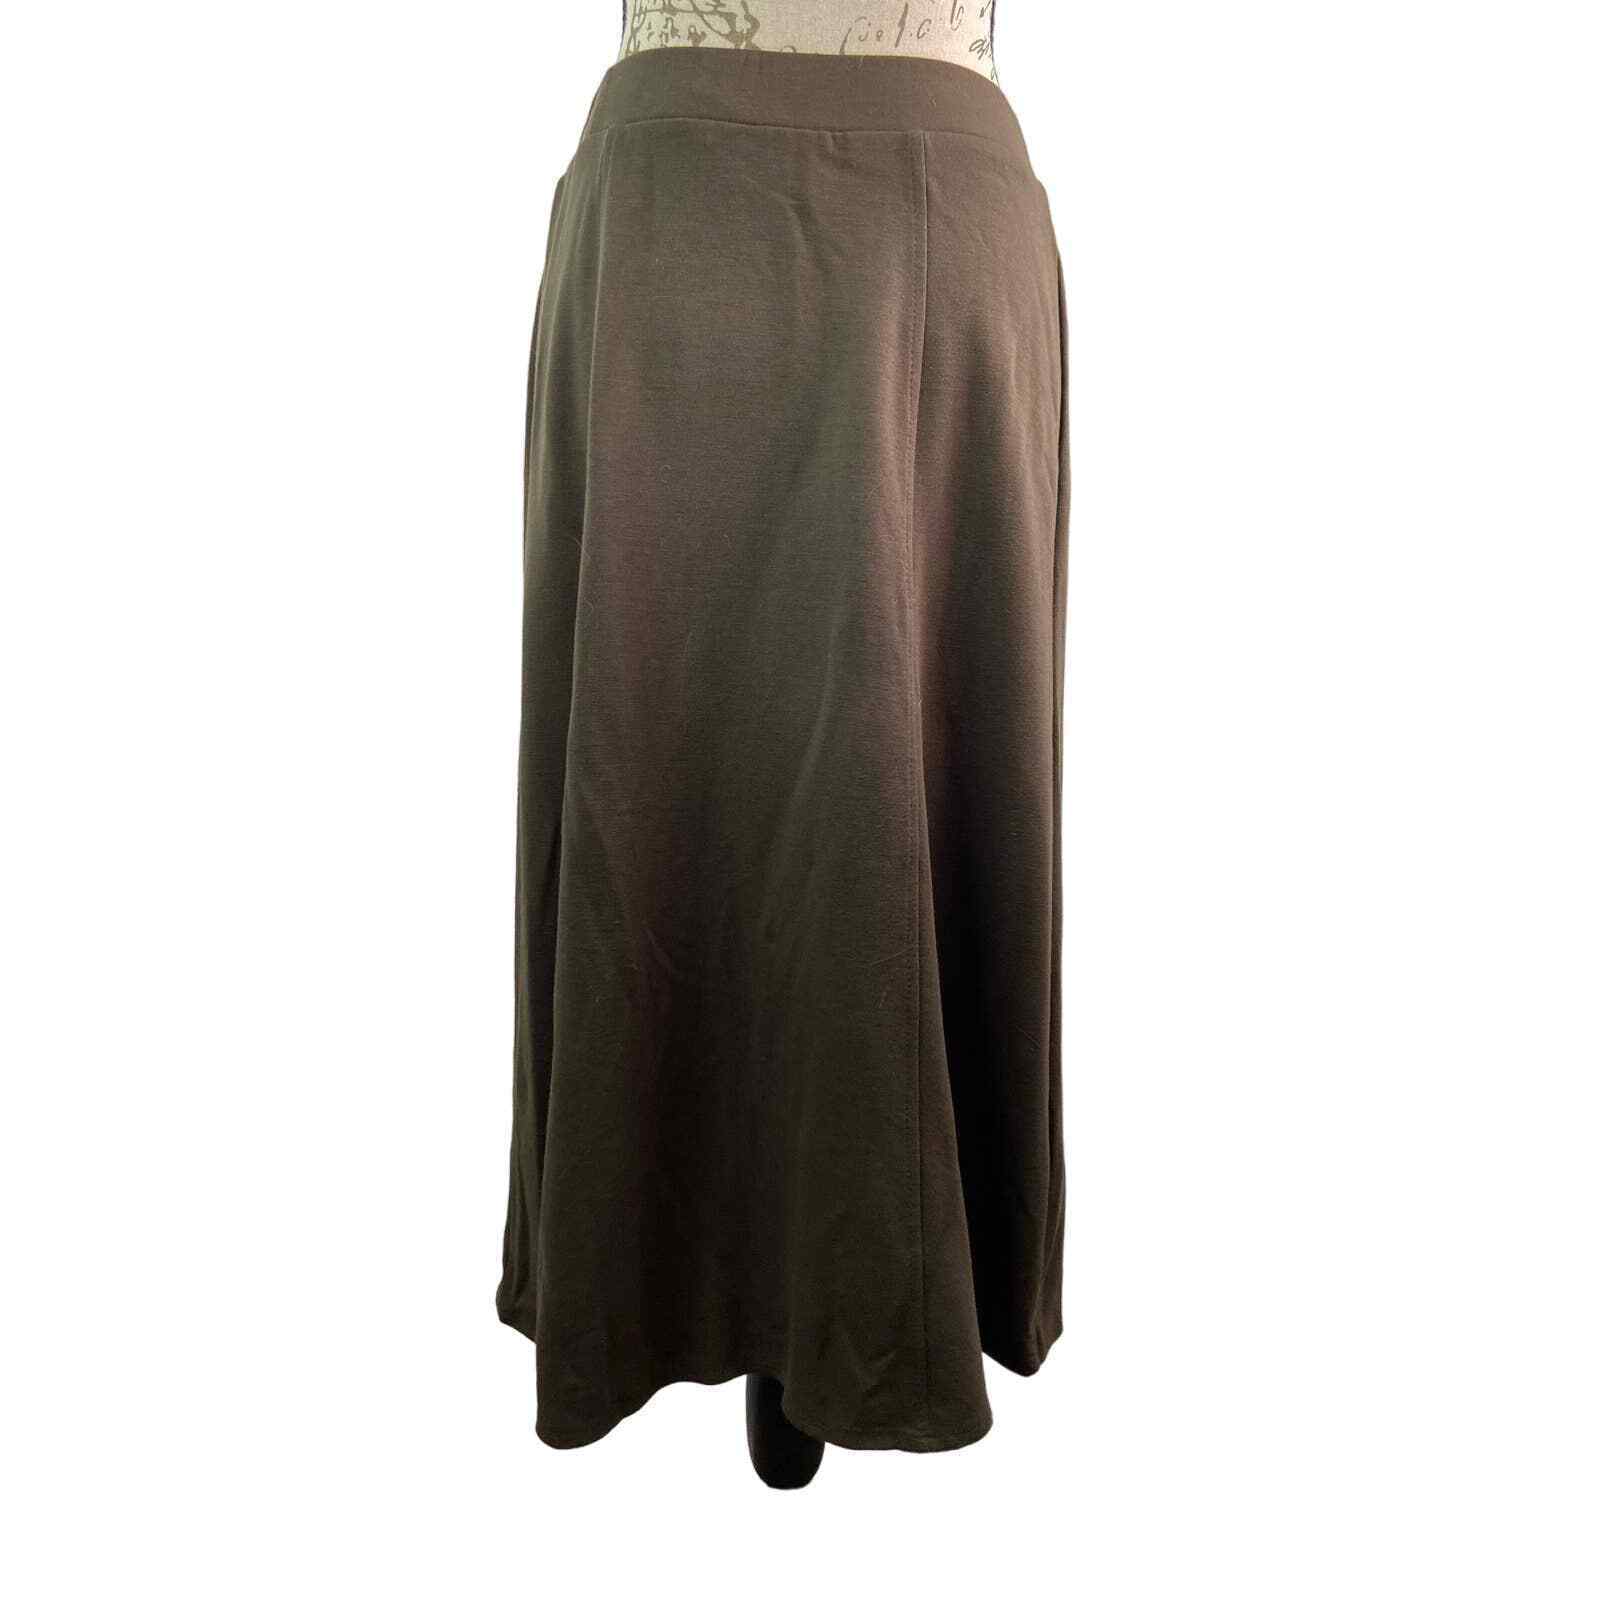 Primary image for Chicos Brown Midi Skirt A line Pleat Pull On Elastic Waist Women Sz 0 US S 4 NEW